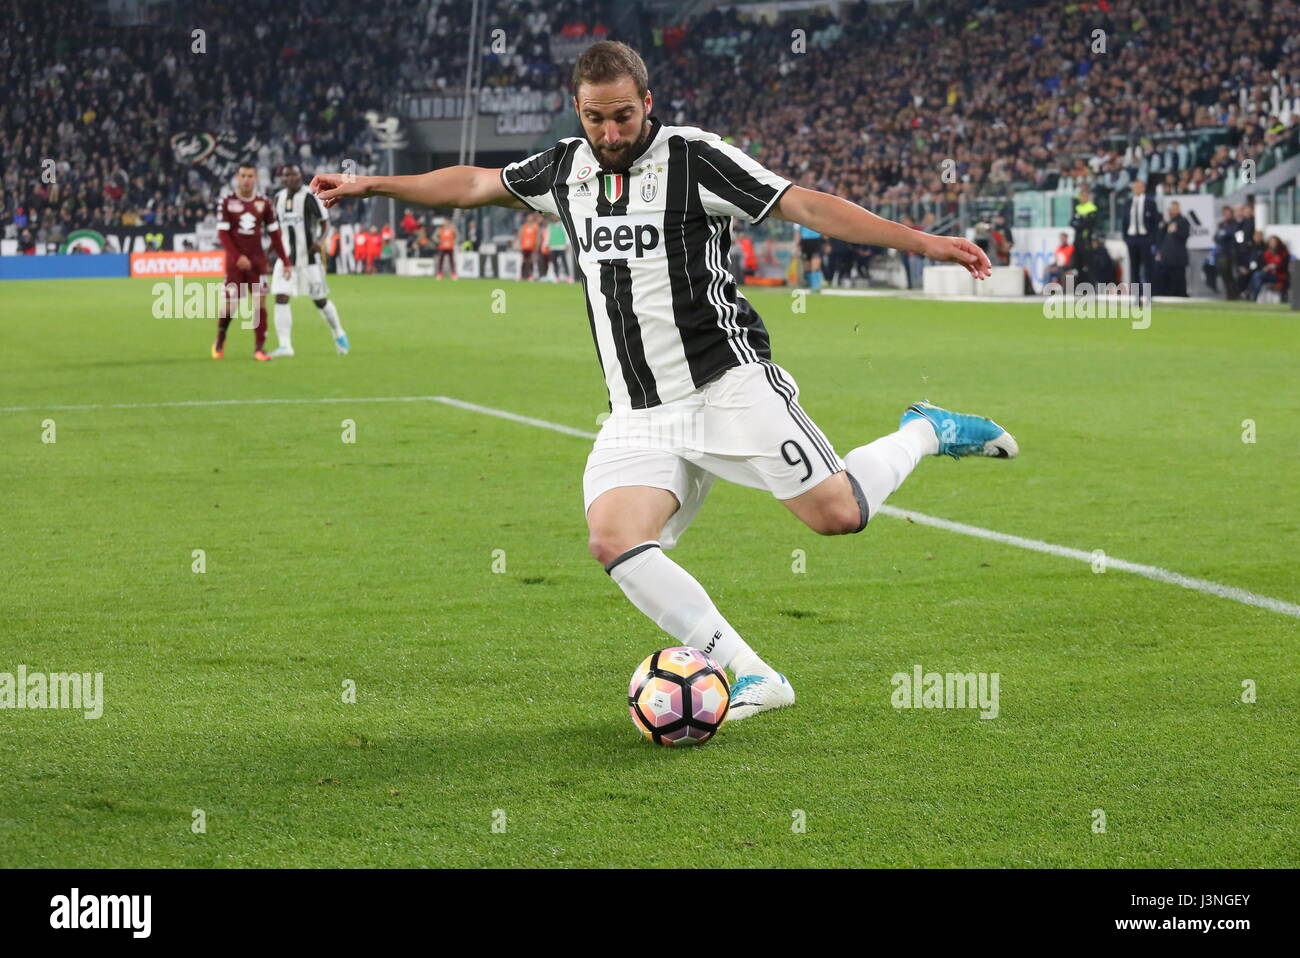 Turin, Italy. 6th May, 2017. Gonzalo Higuain (Juventus FC) in action during the Serie A football match between Juventus FC and Torino FC  at Juventus Stadium on may 06, 2017 in Turin, Italy. Credit: Massimiliano Ferraro/Alamy Live News Stock Photo